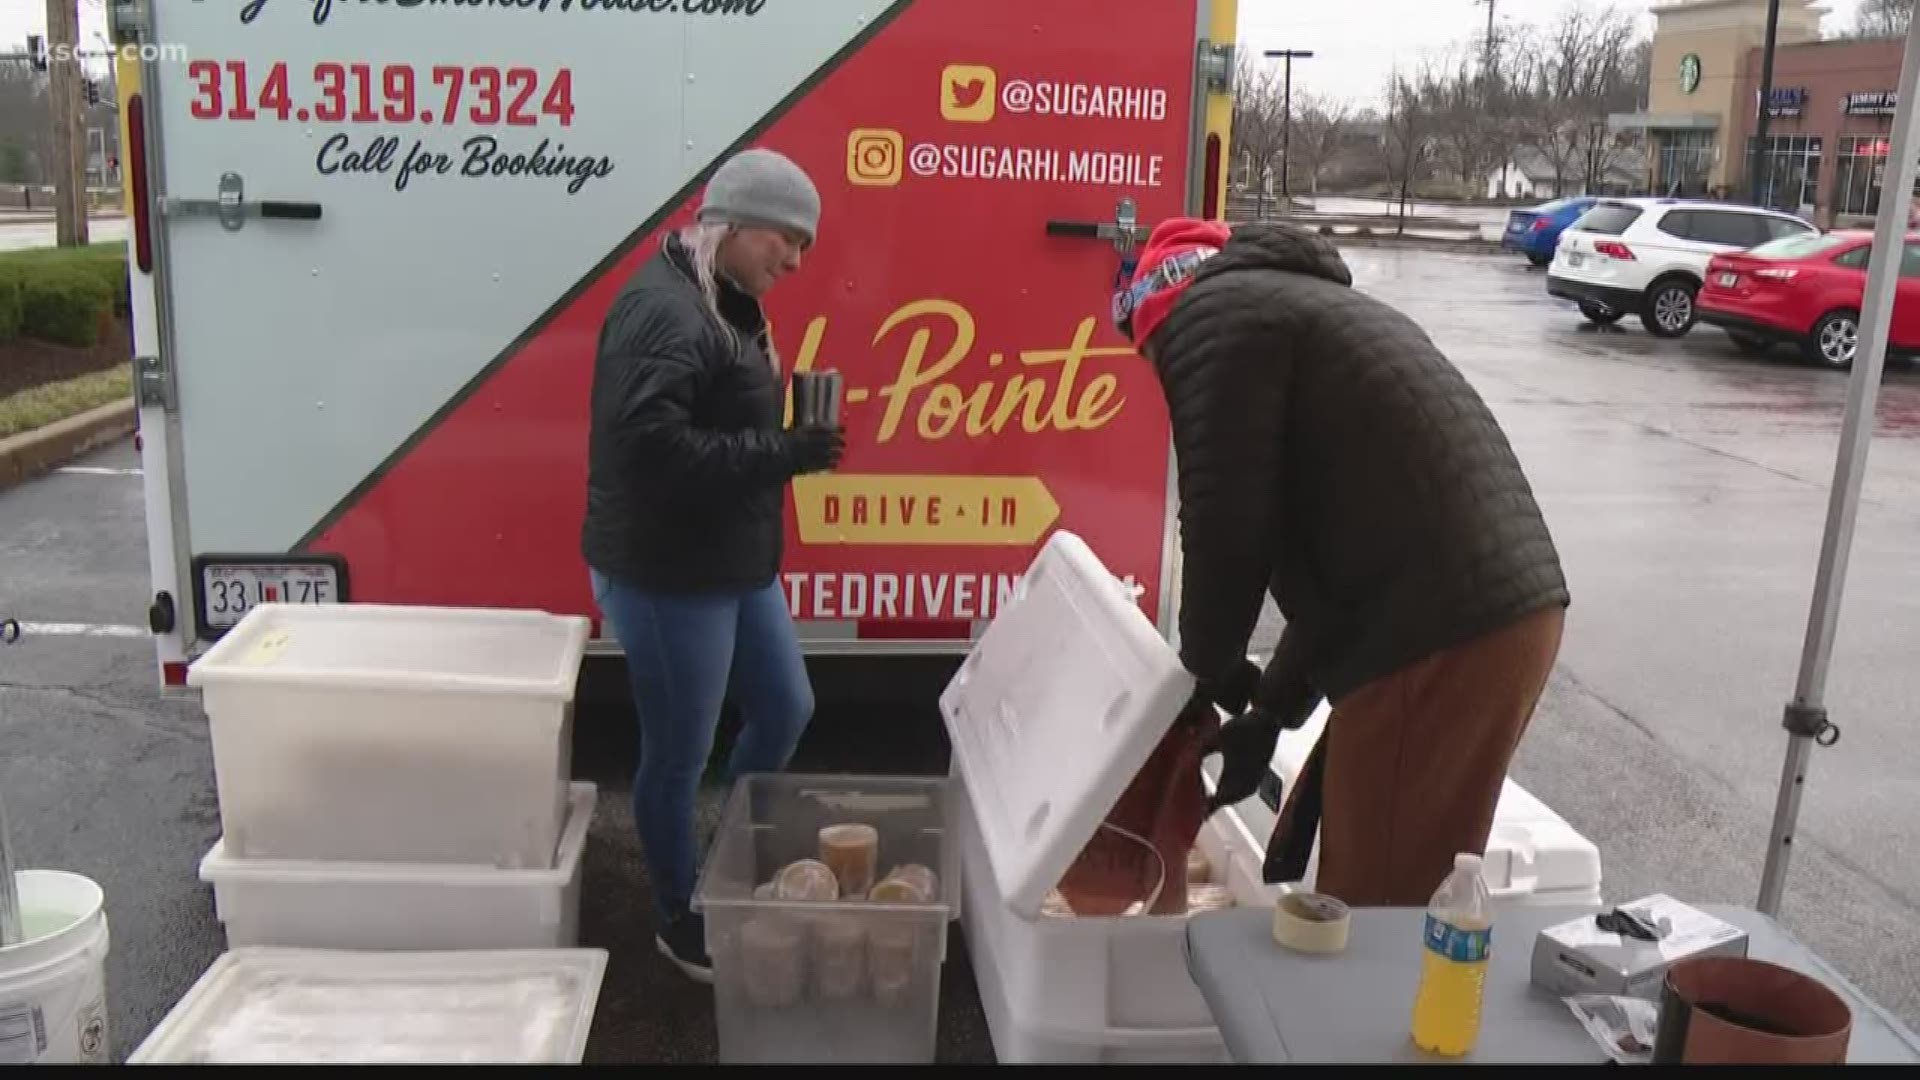 Hi-Pointe Drive-In gave away sandwiches Sunday morning in exchange for donations